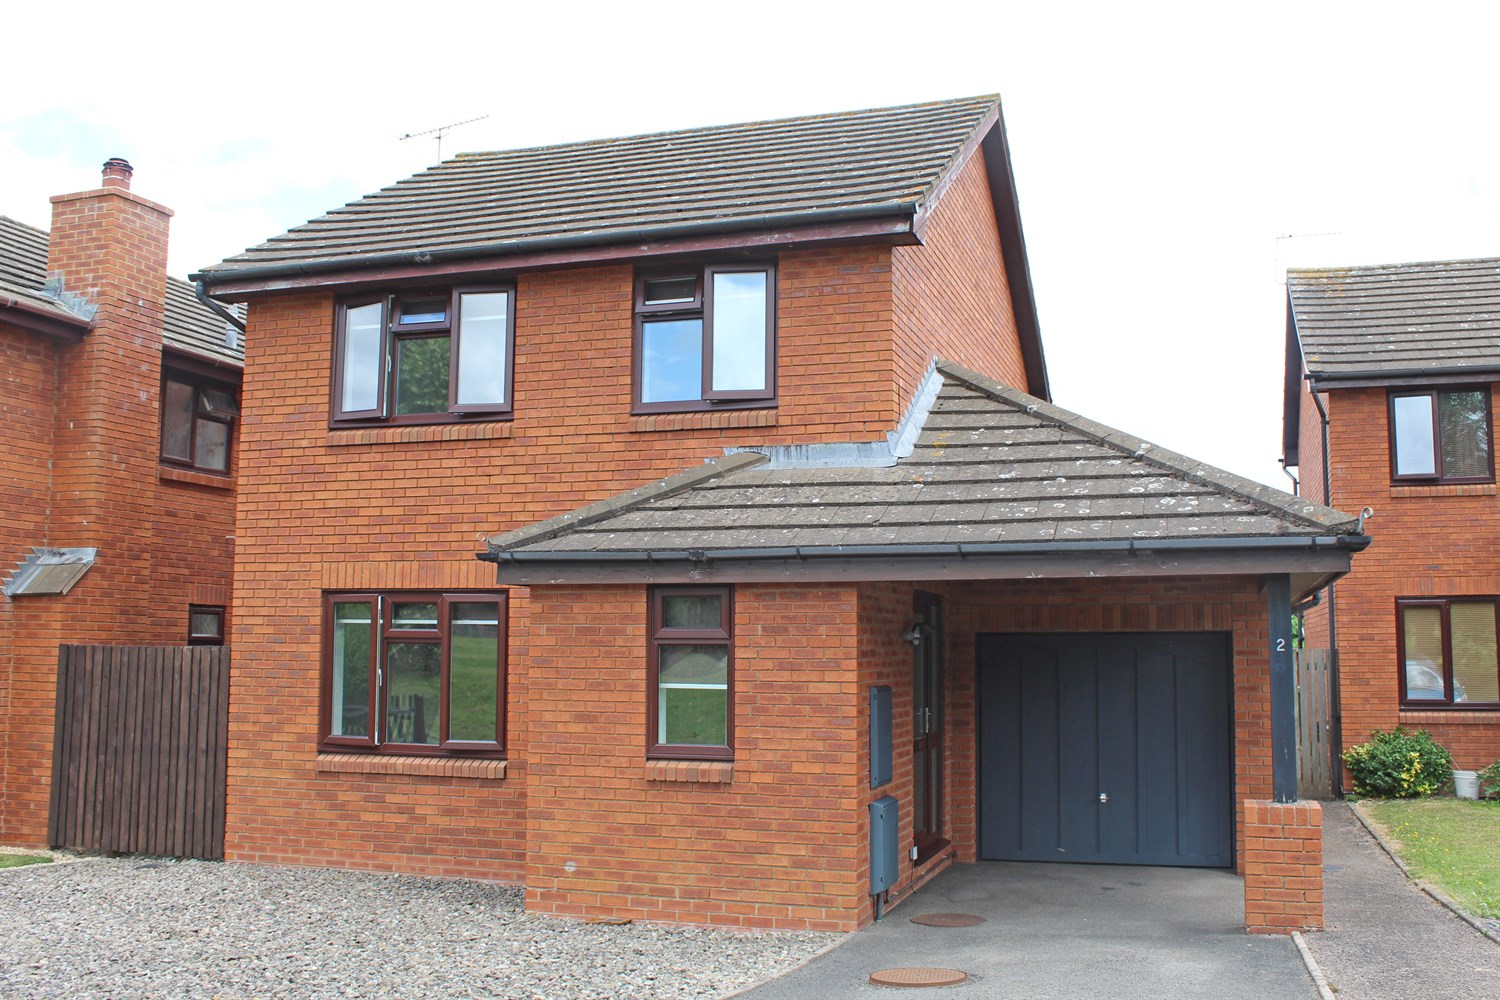 2 Bridle Road, Kings Acre, Hereford